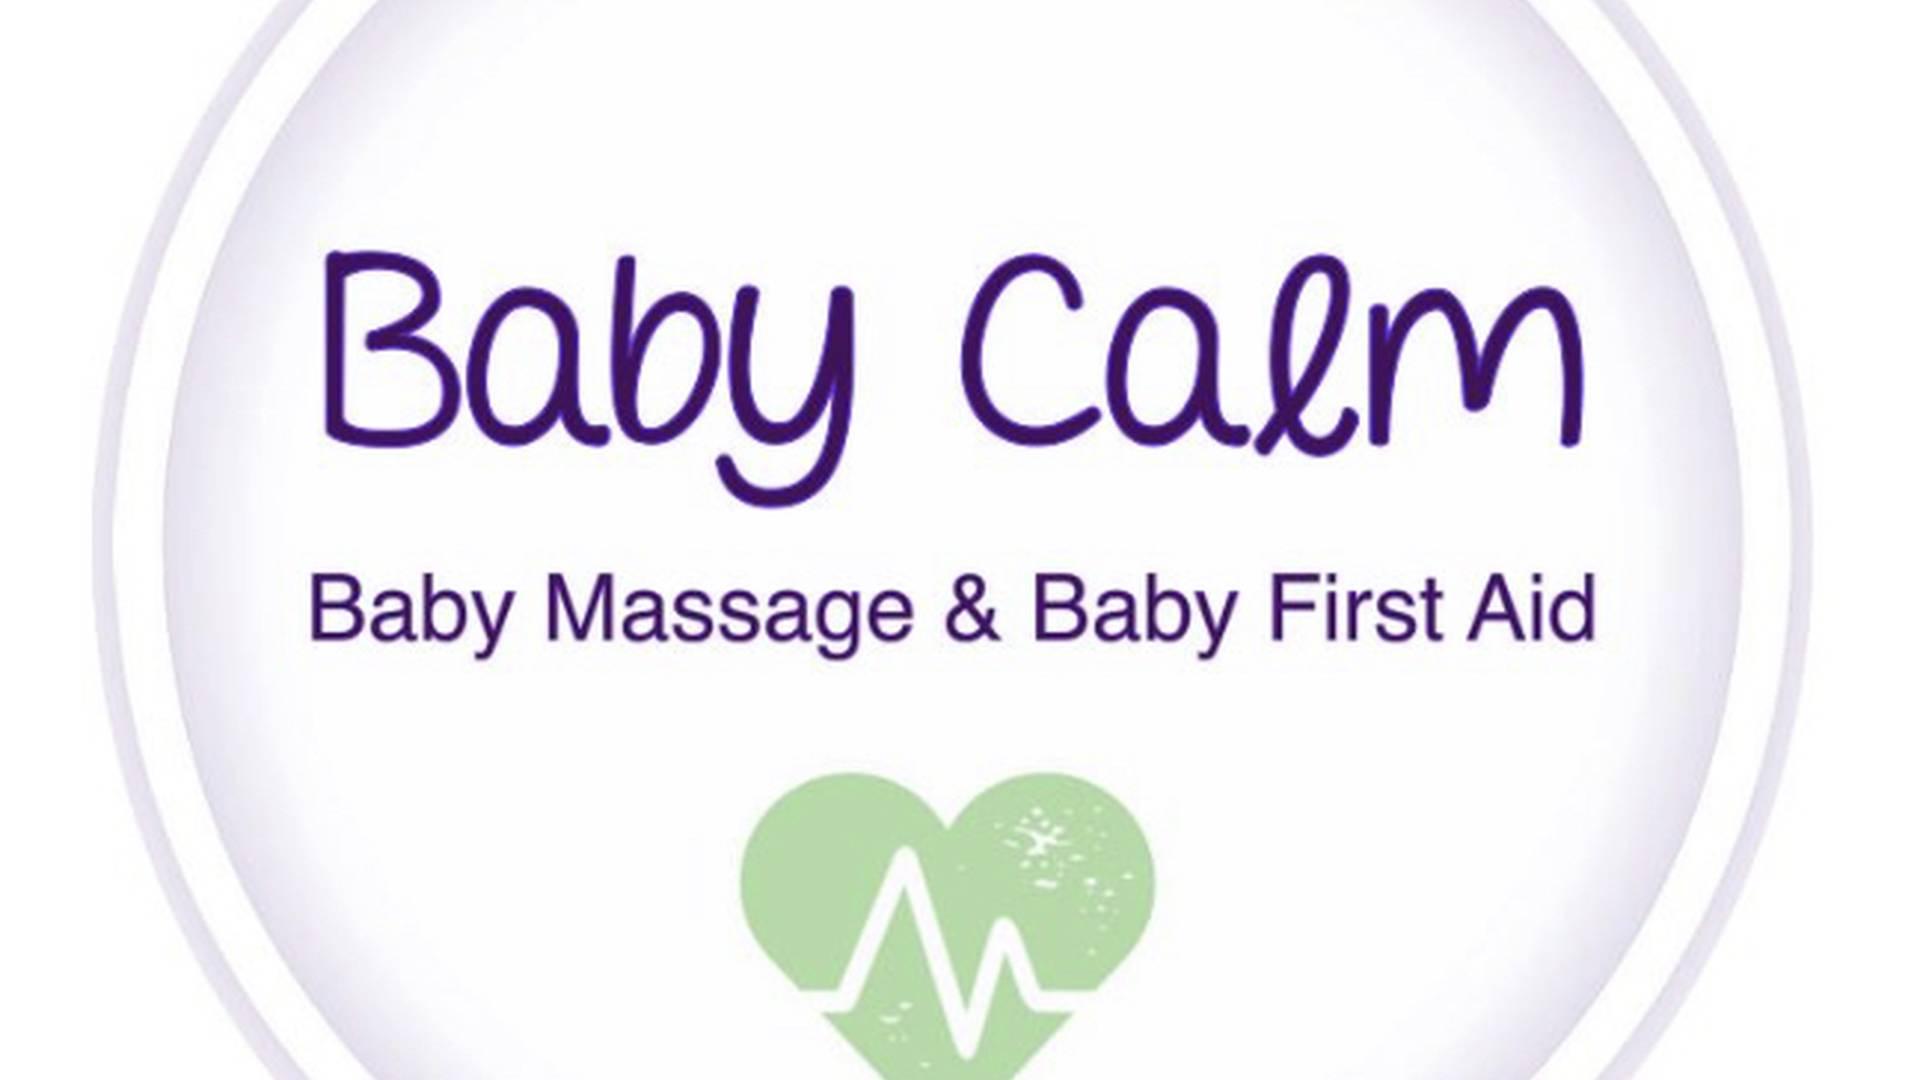 Baby Calm - Baby Massage & Baby First Aid photo